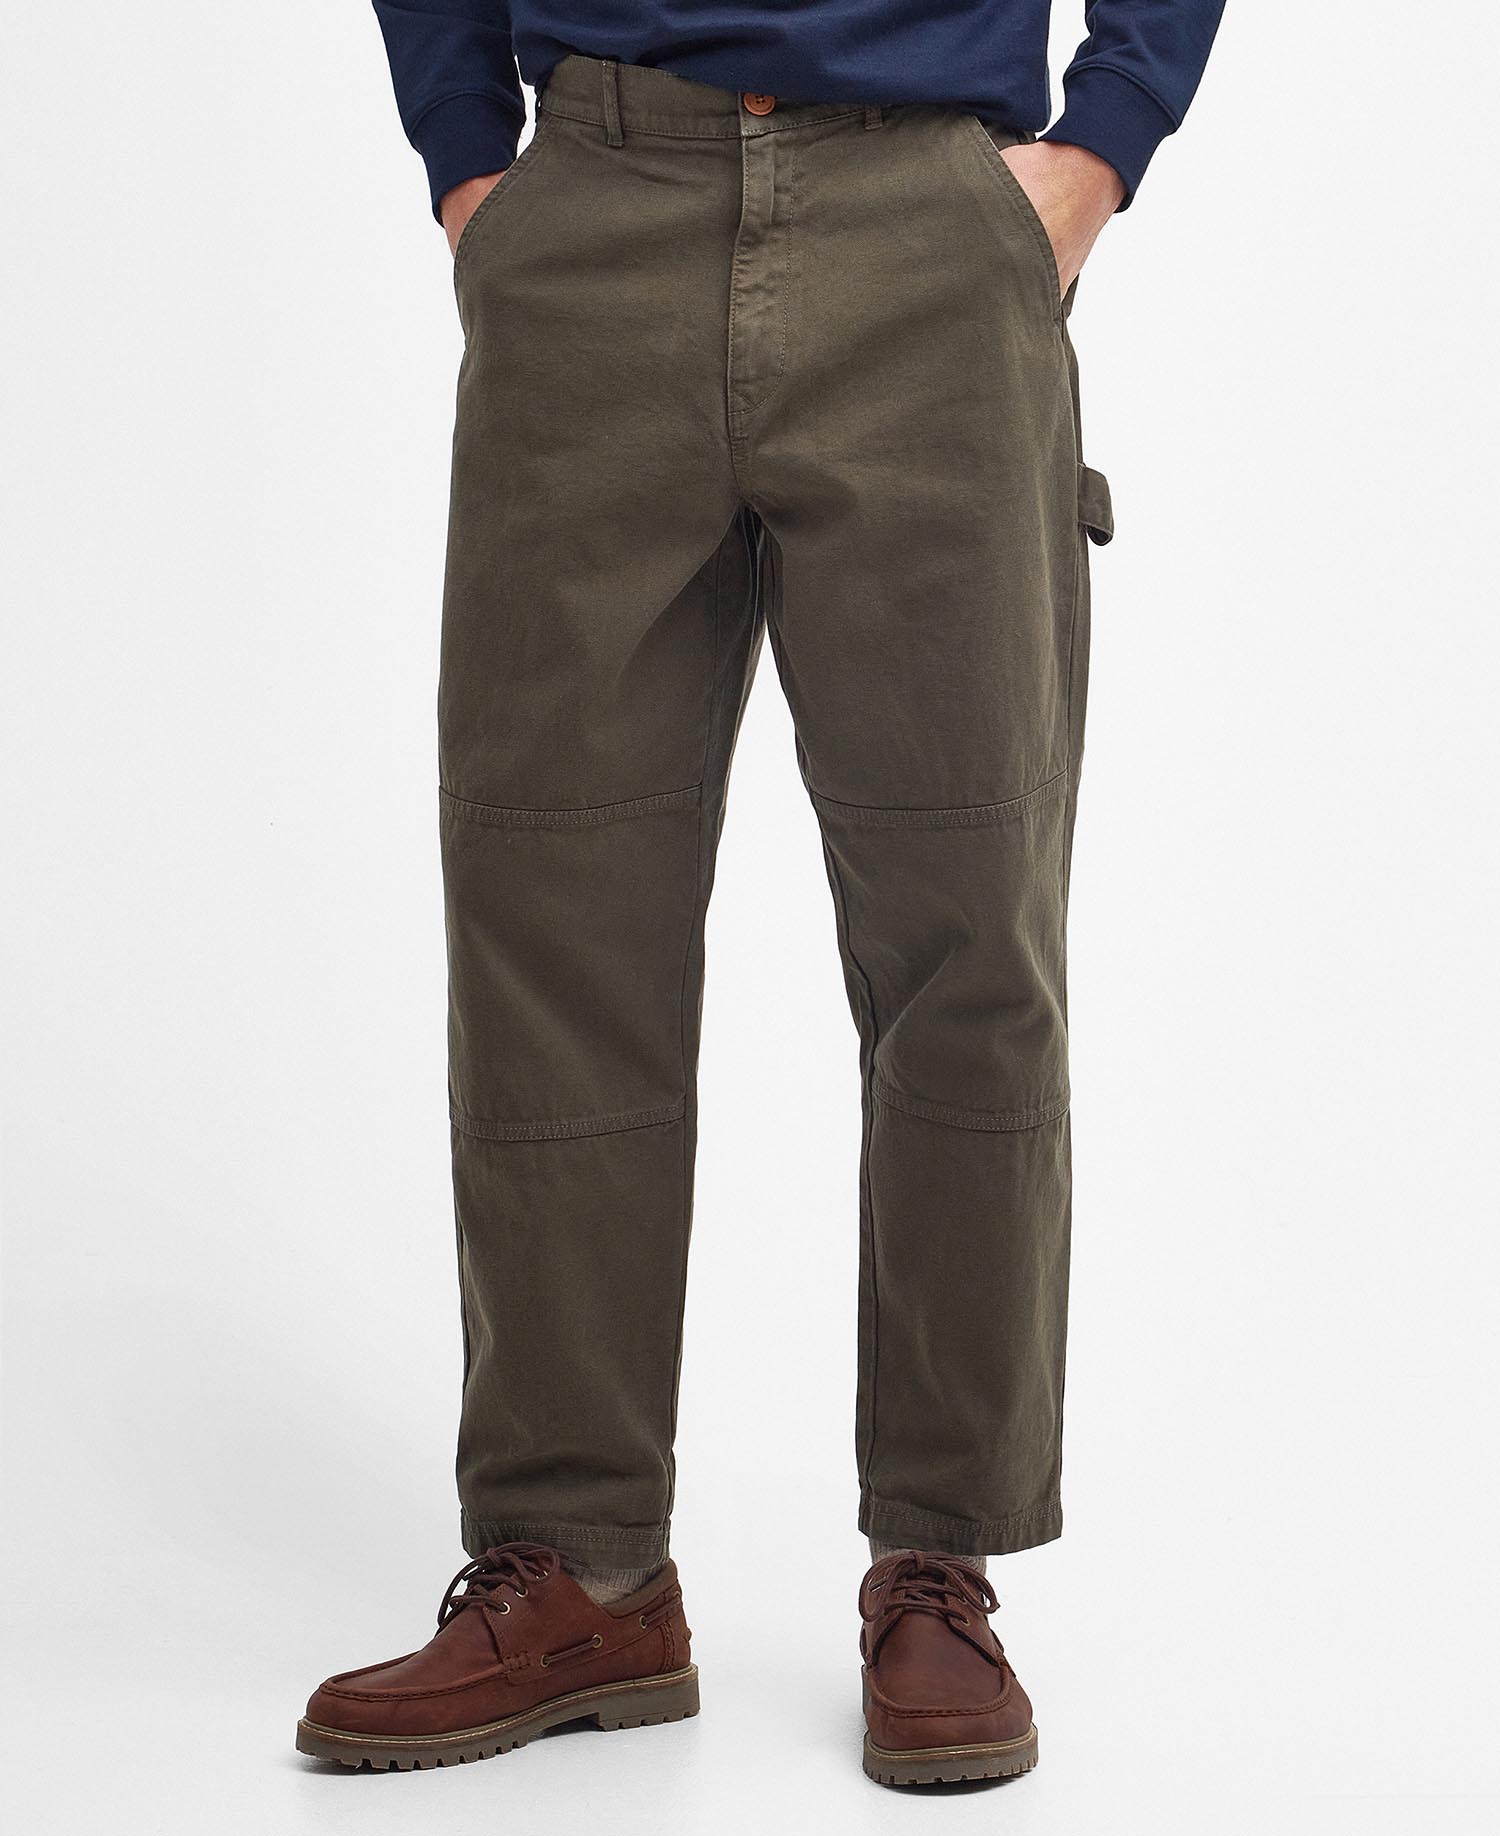 Barbour Chesterwood Work Trousers